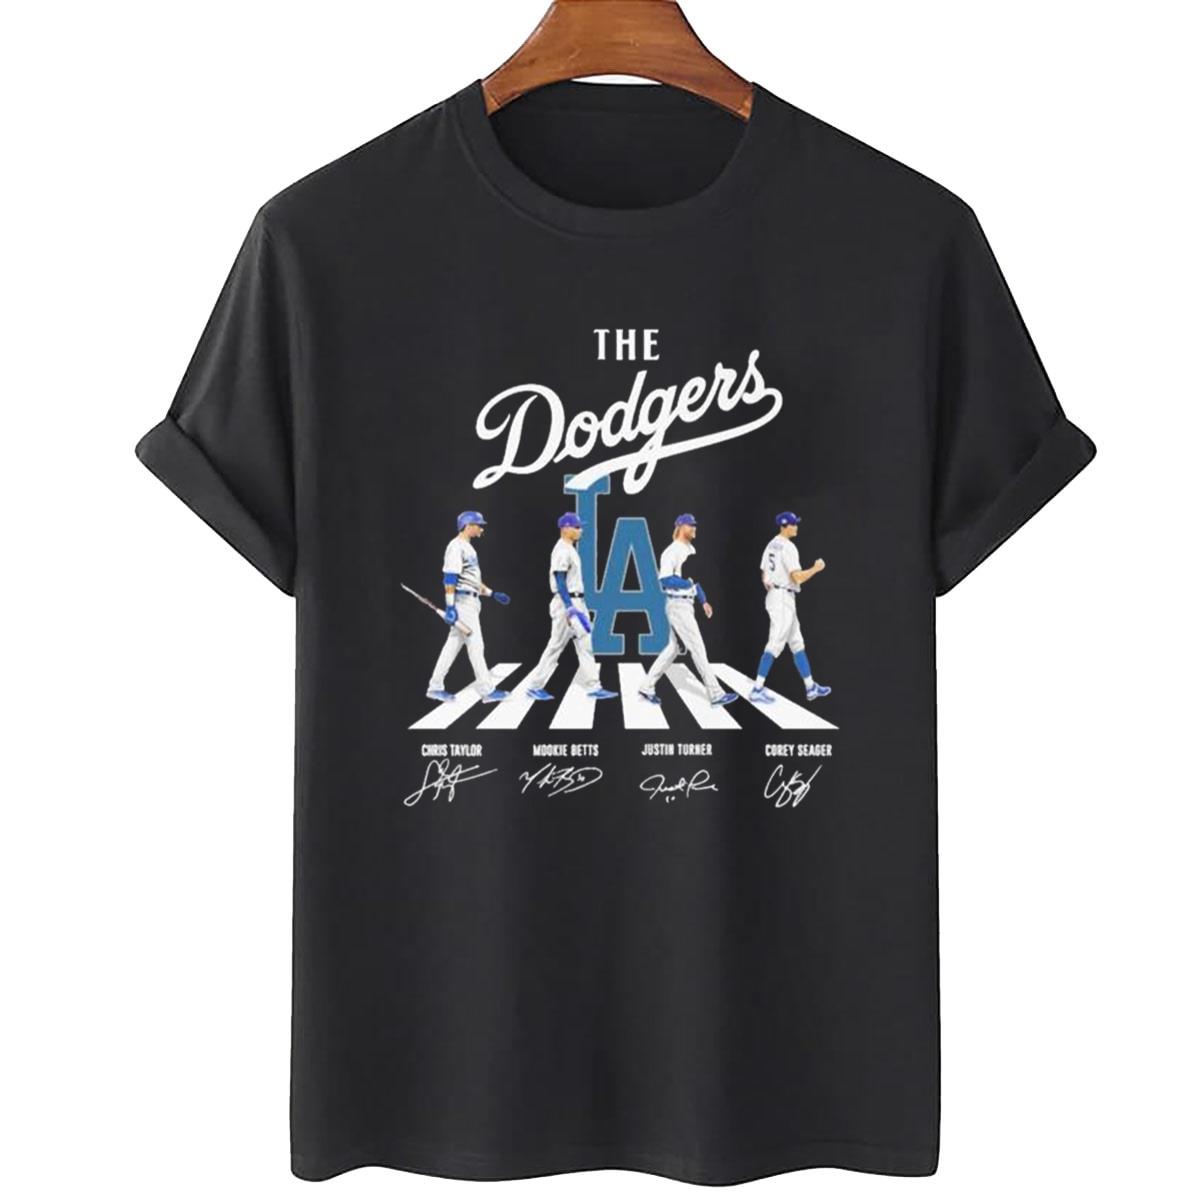 The Dodgers Chris Taylor Mookie Betts Justin Turner Corey Seager Abbey Road Signatures Unisex T-Shirt